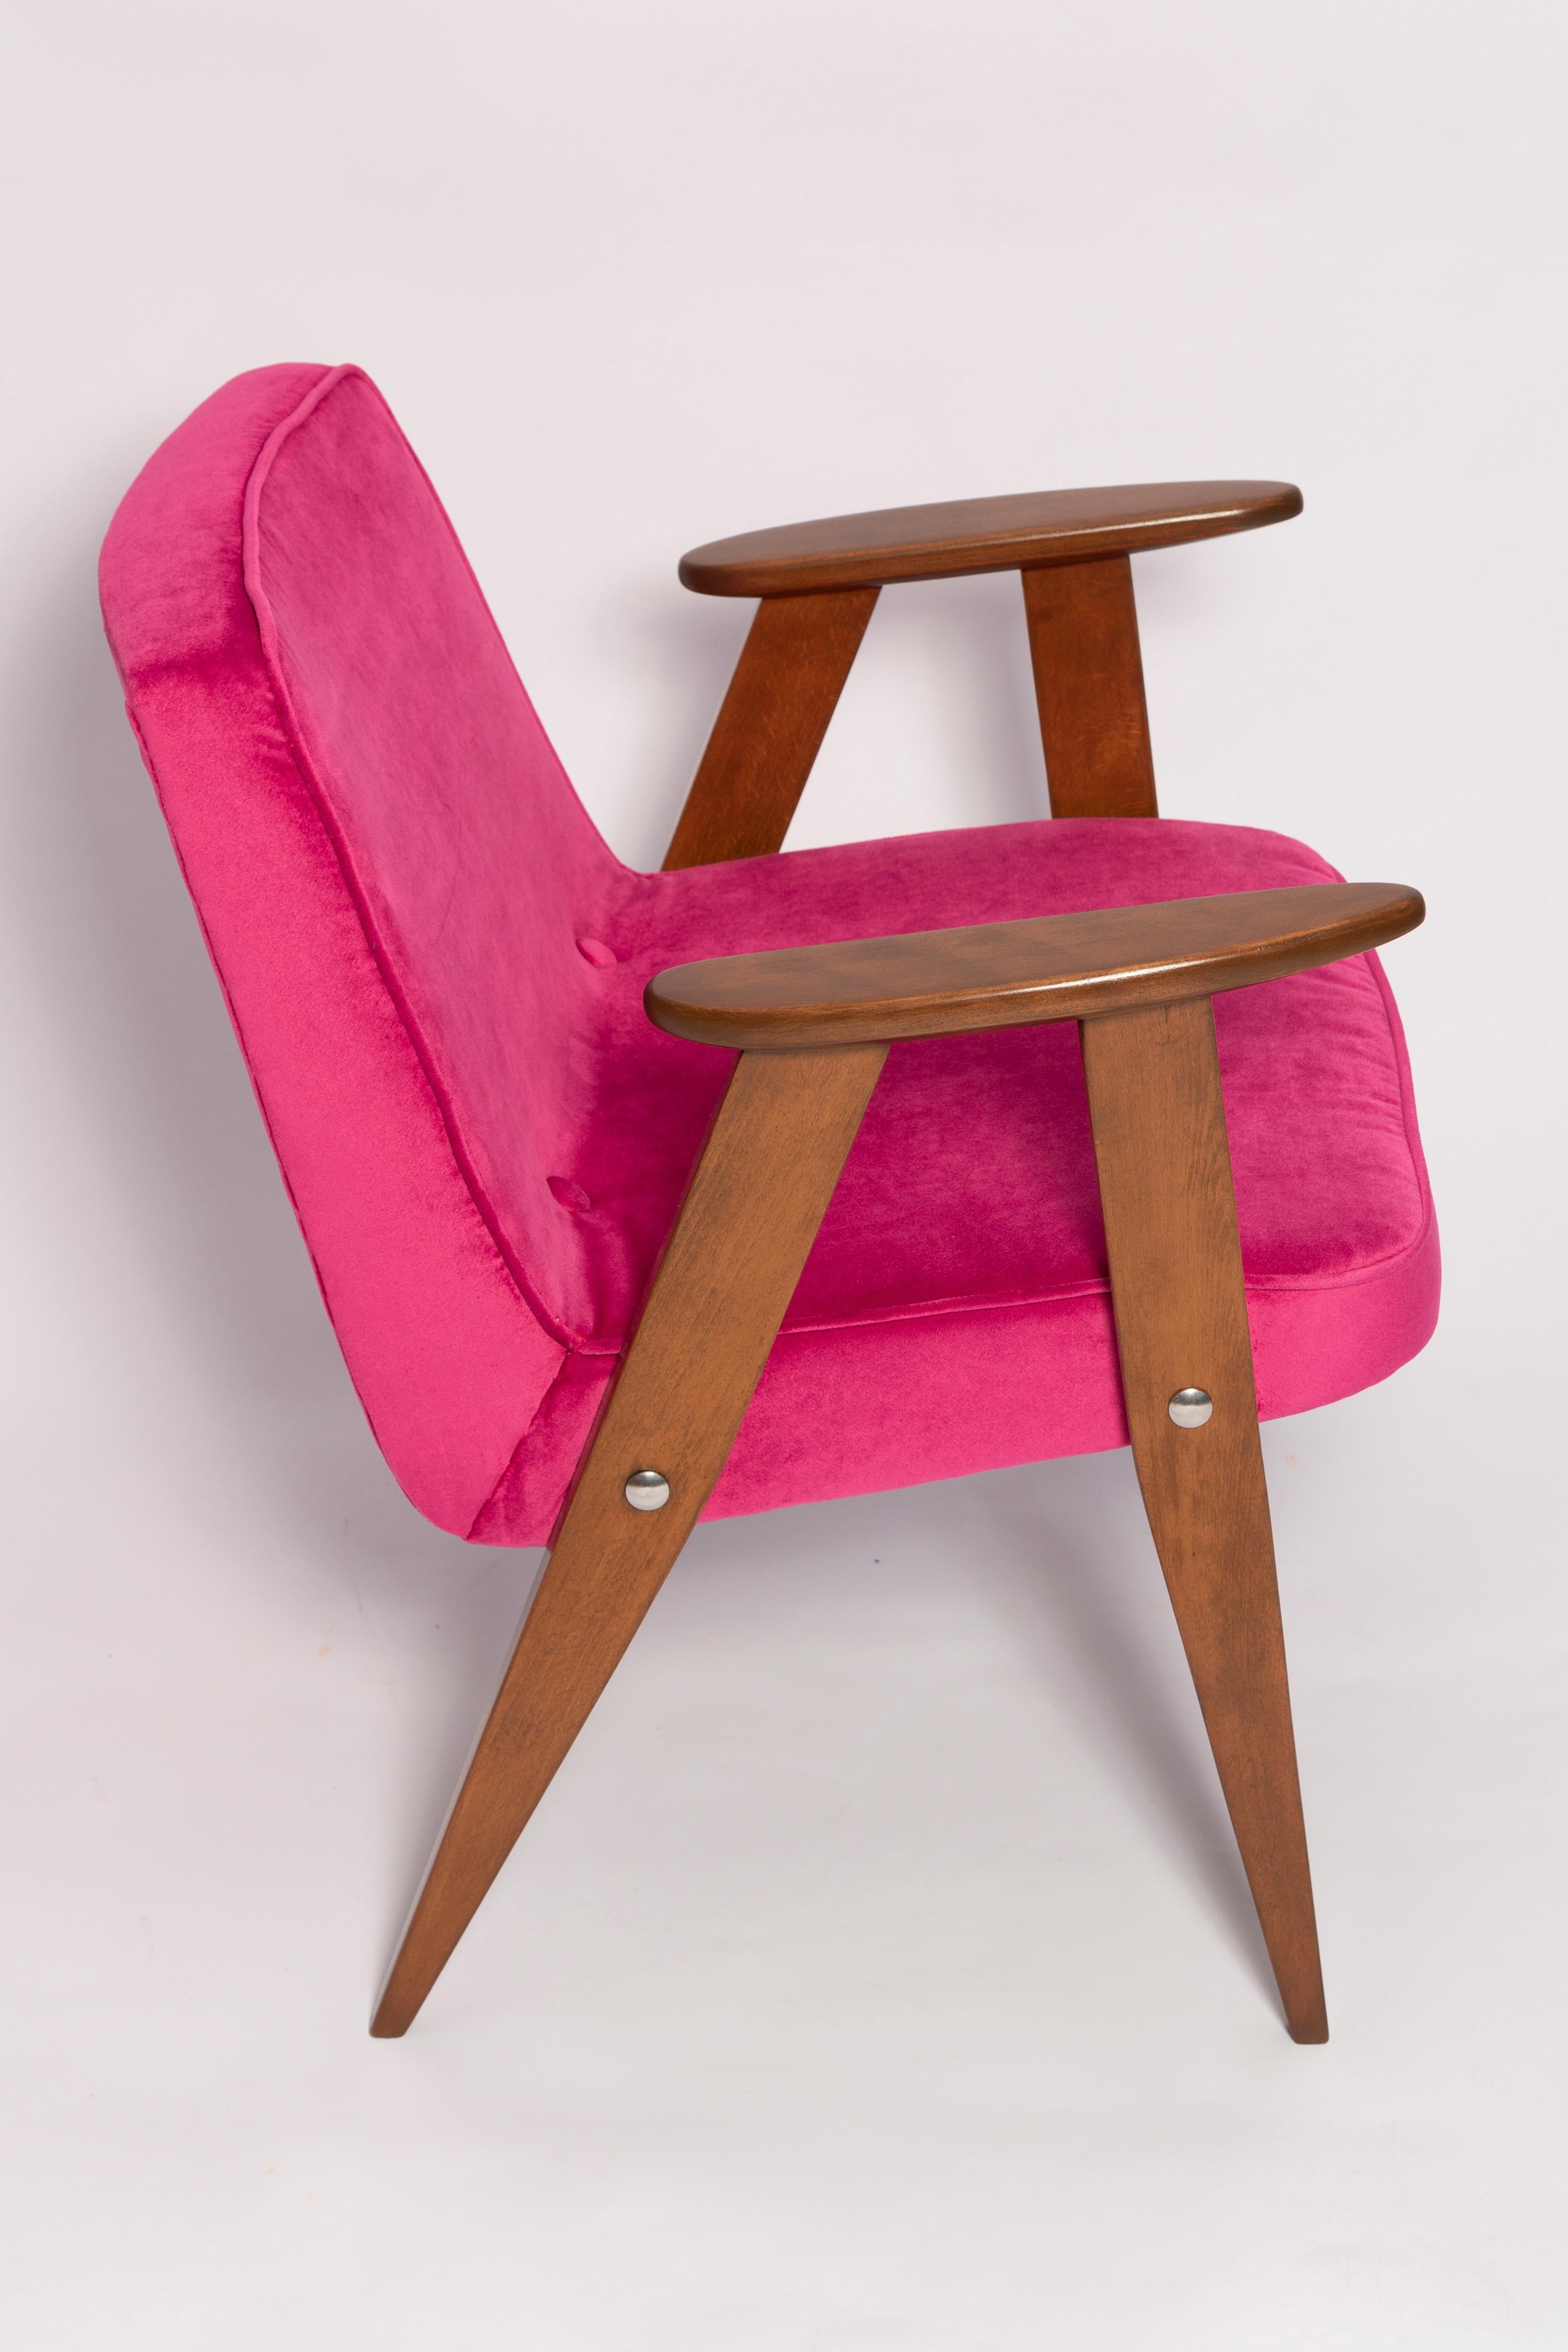 Pair of Mid-Century 366 Armchairs, Pink and Blue, by Chierowski Europe, 1960s For Sale 5